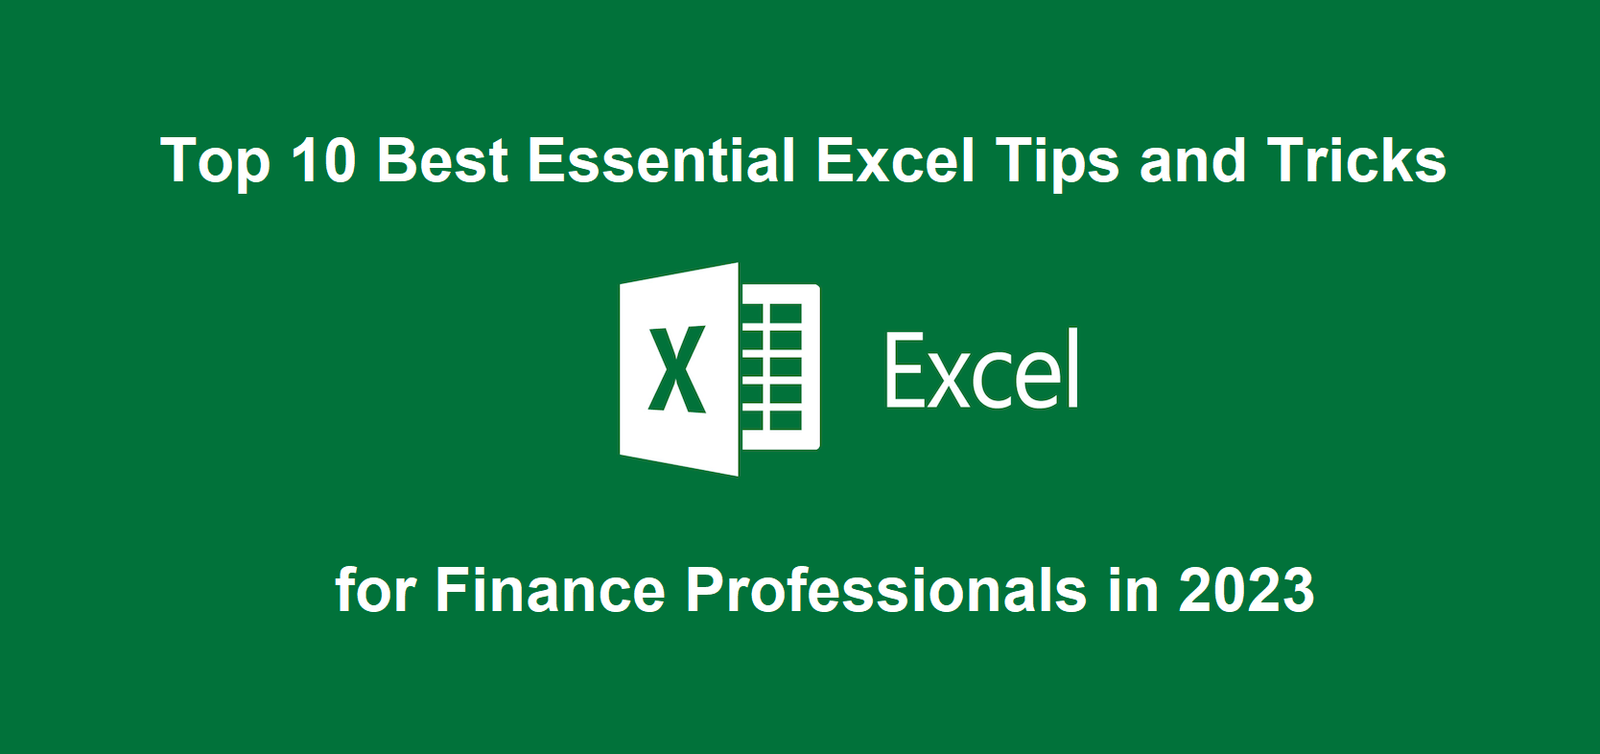 Top 10 Best Essential Excel Tips and Tricks